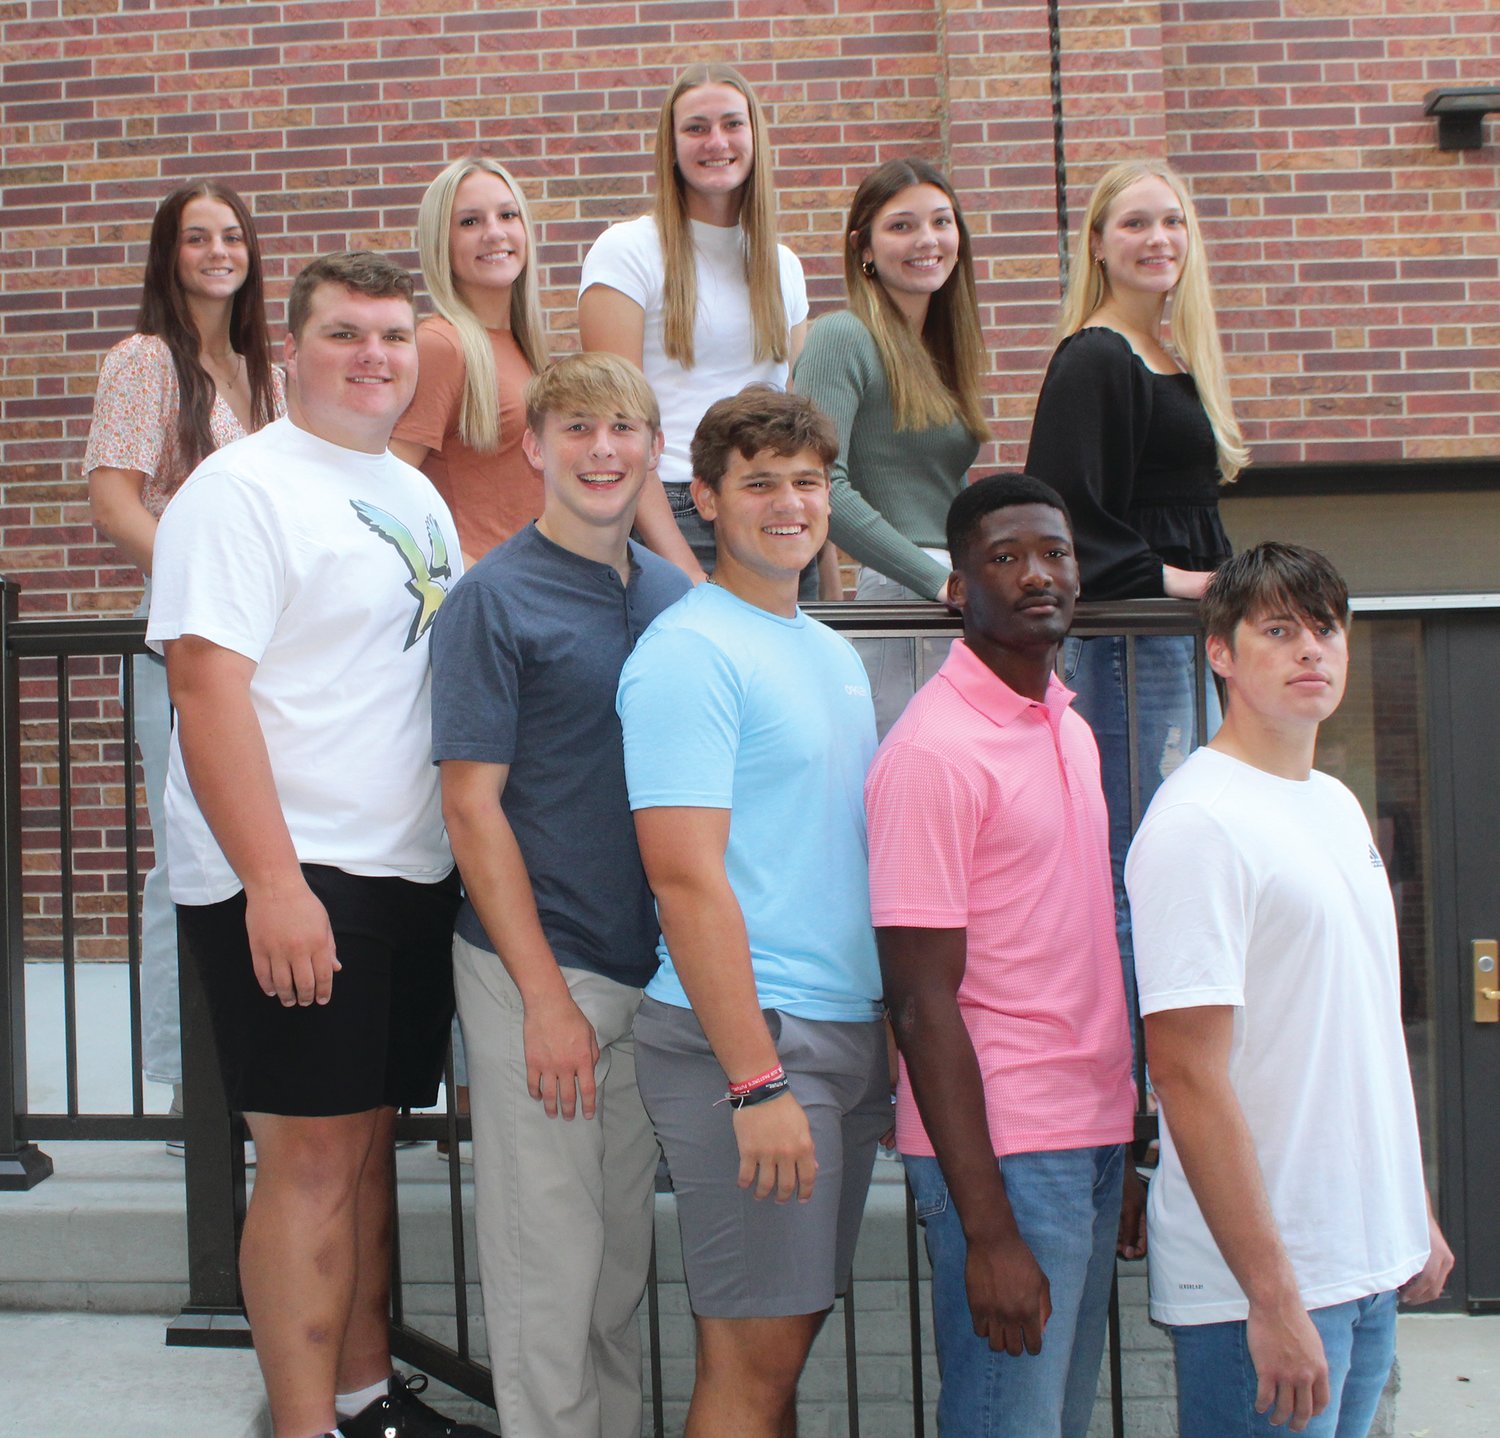 Homecoming candidates at Wayne High School include (front) Bo Armstrong, Eli Barner, Brooks Kneifl, Sedjro Agoumba and Daniel Judd. (back) Jaycee Bruns, Candace Heggemeyer, Brooklyn Kruse, Sierra Mutchler and Laura Hasemann. Coronation will take place Friday, Sept. 16 at halftime of the Wayne High-Raymond Central football game.